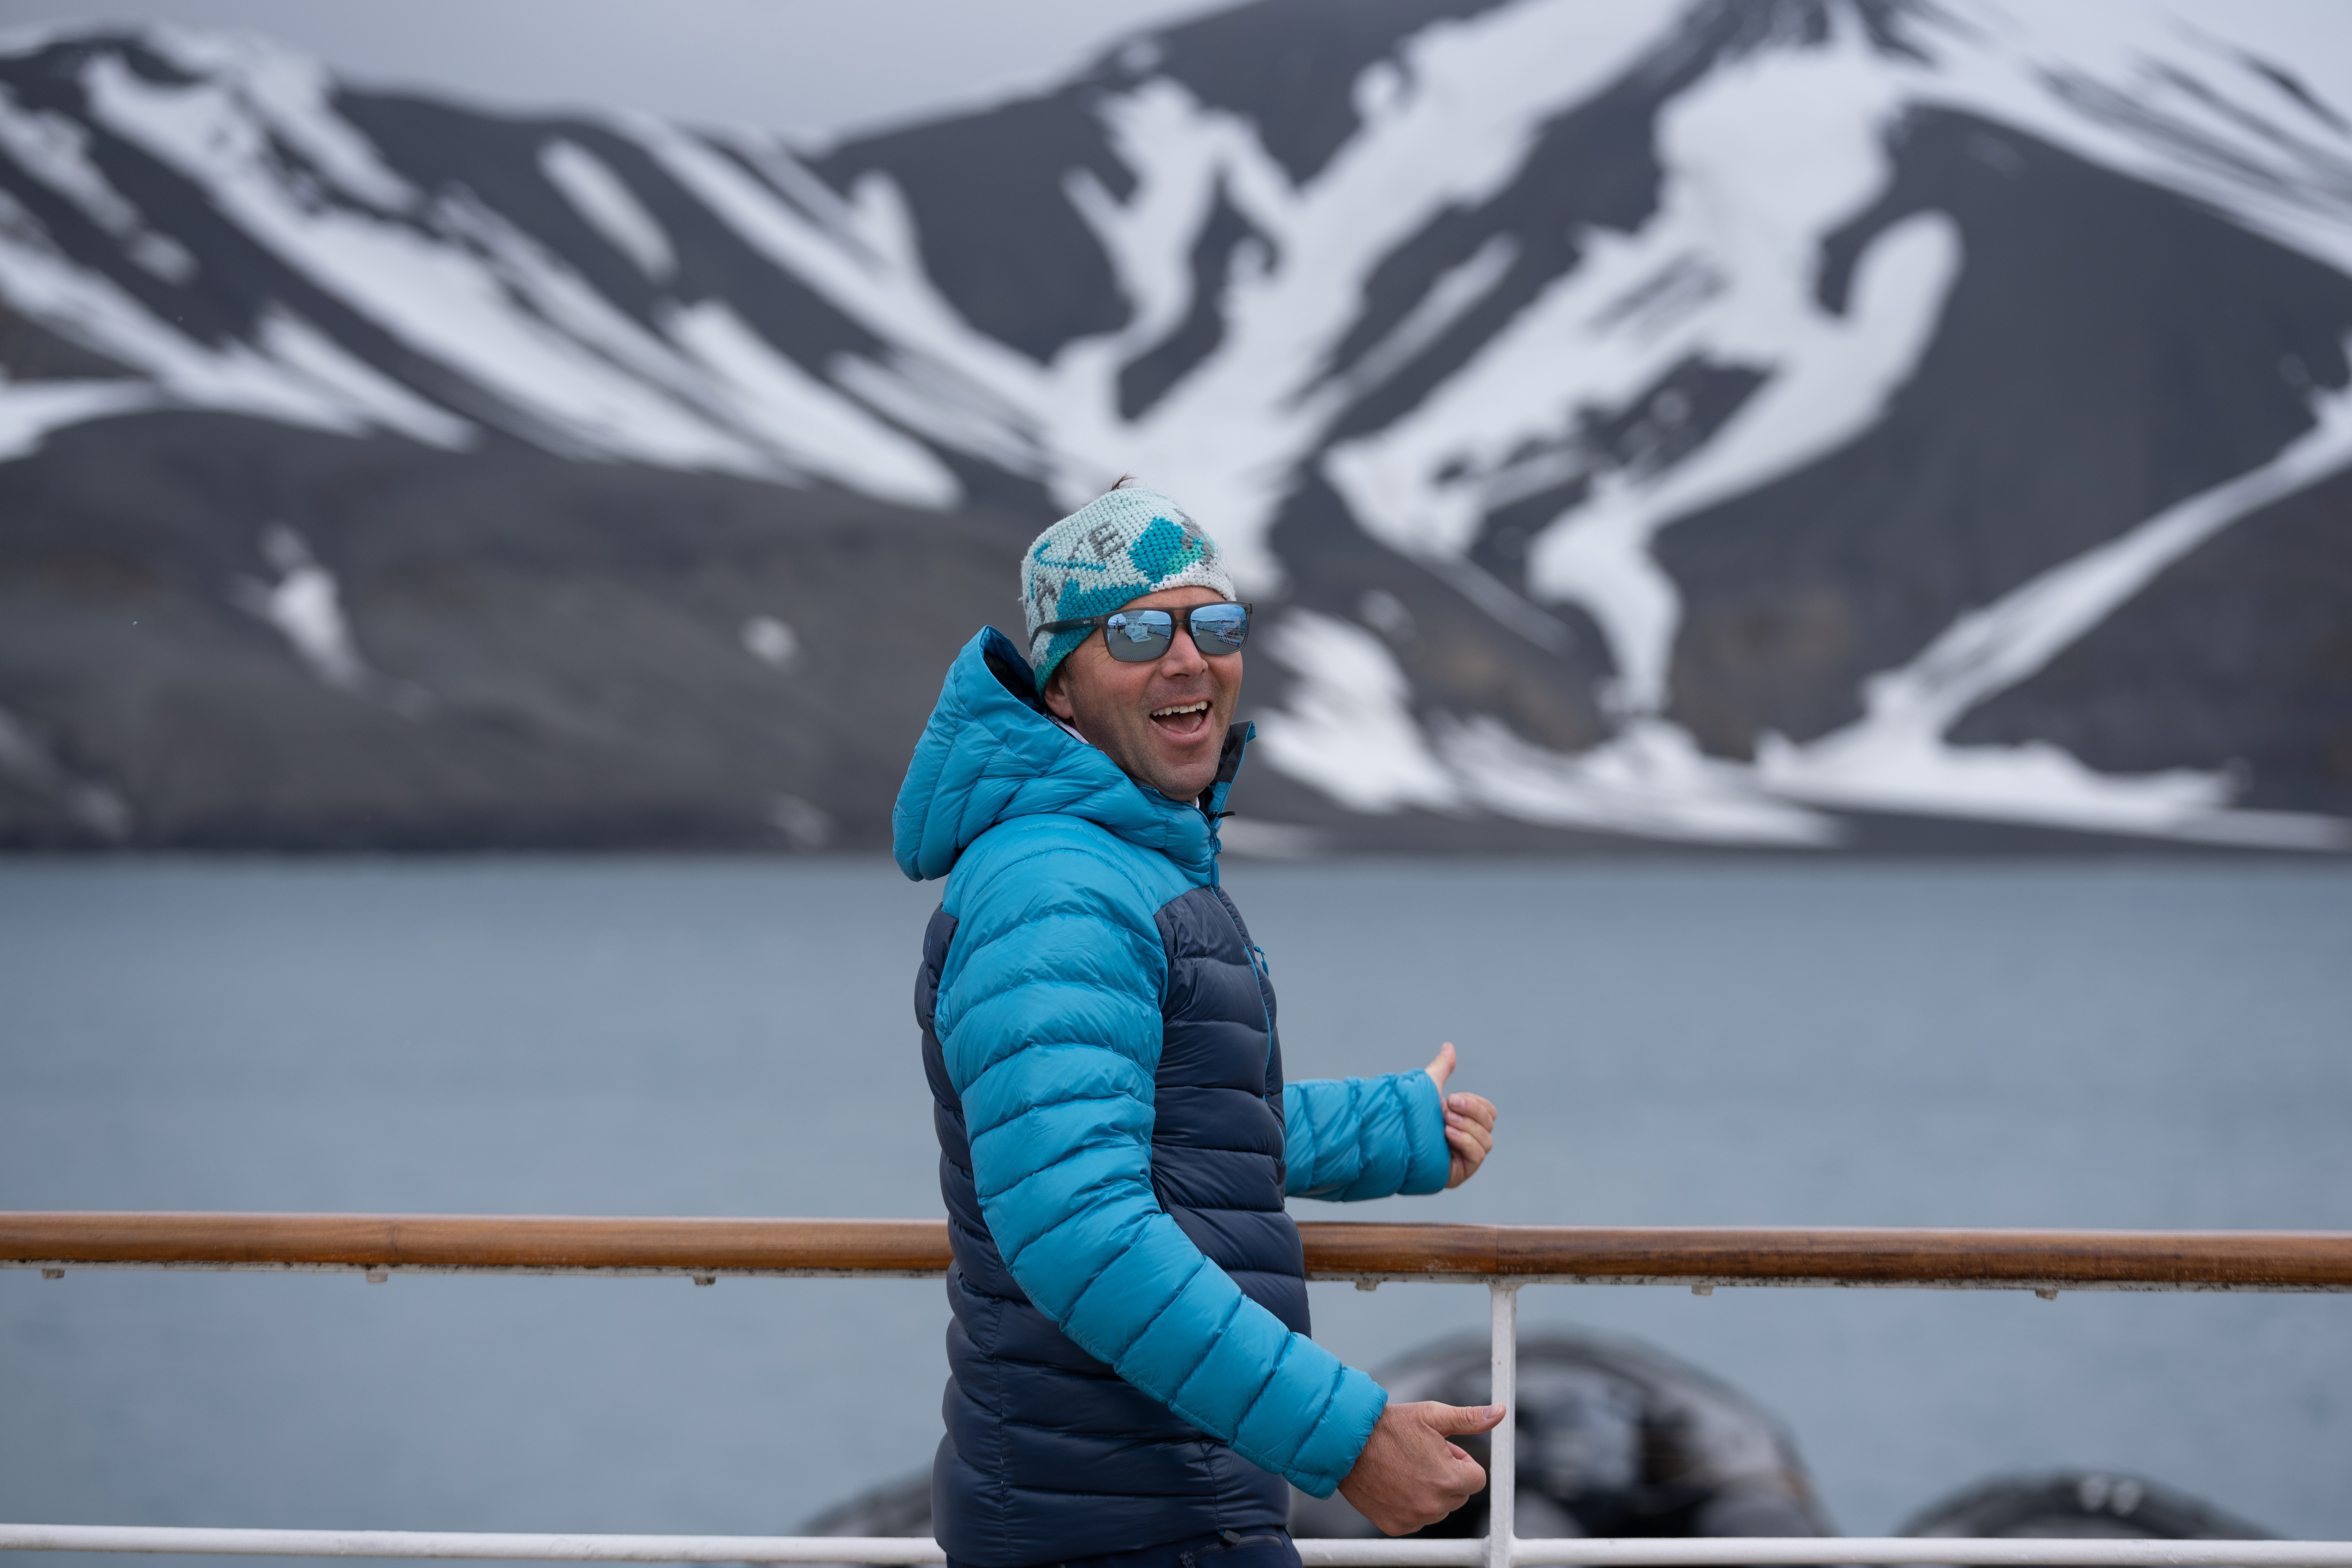 Chris Davenport pictured smiling with a double thumbs up, color blocked jacket, beanie and sunglasses, overlooking the water and a snow capped peak.